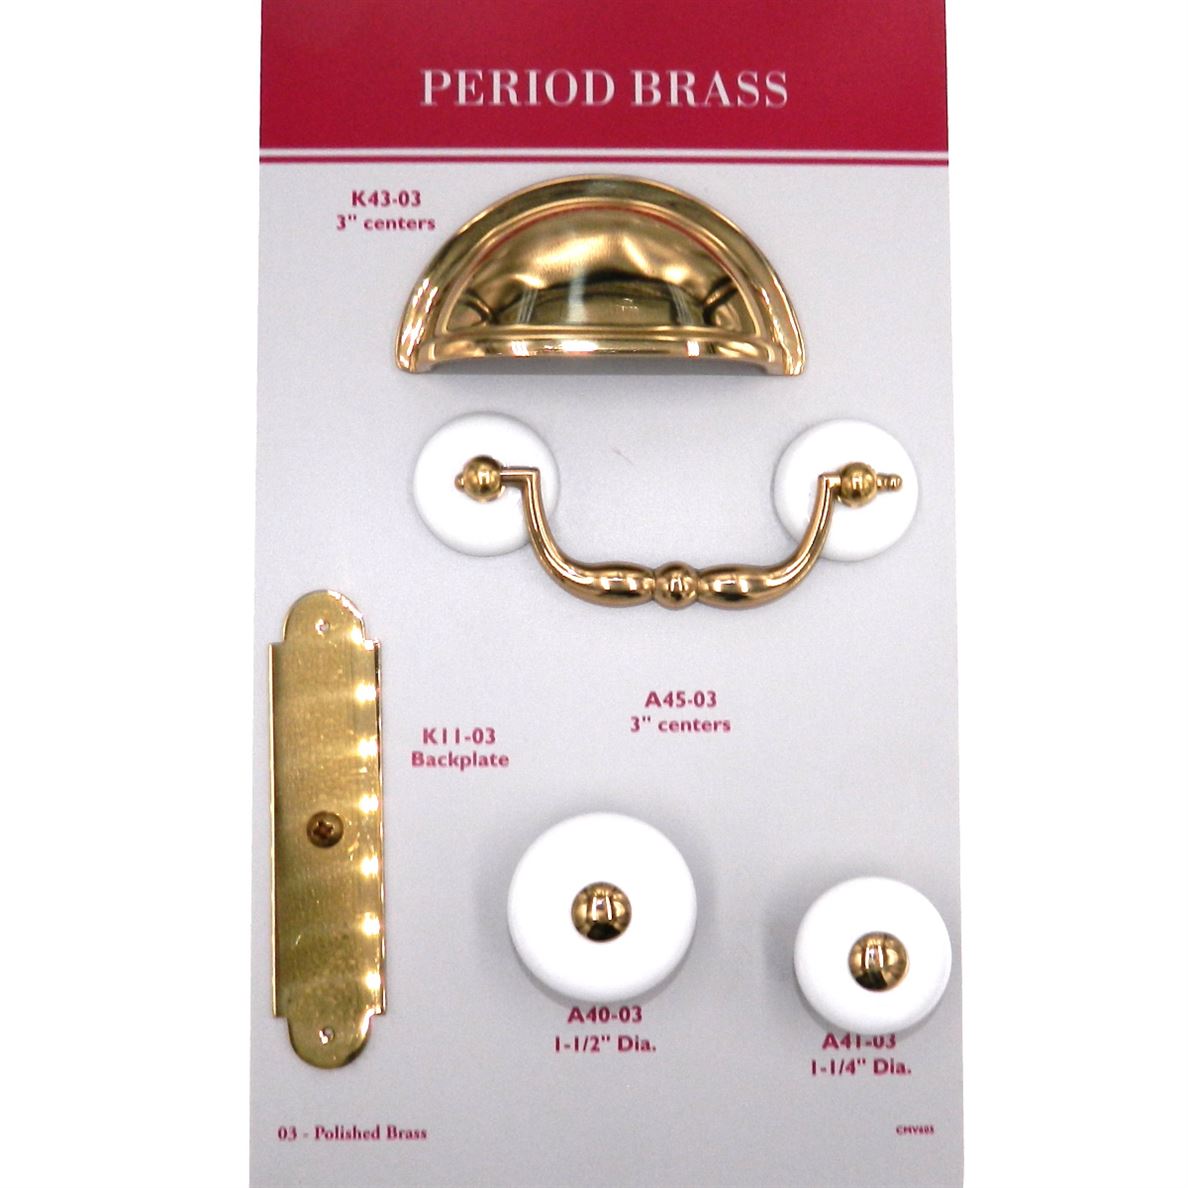 Belwith Keeler Betsy Ross Solid Brass With White 1 1/4" Cabinet Knob A41-PB